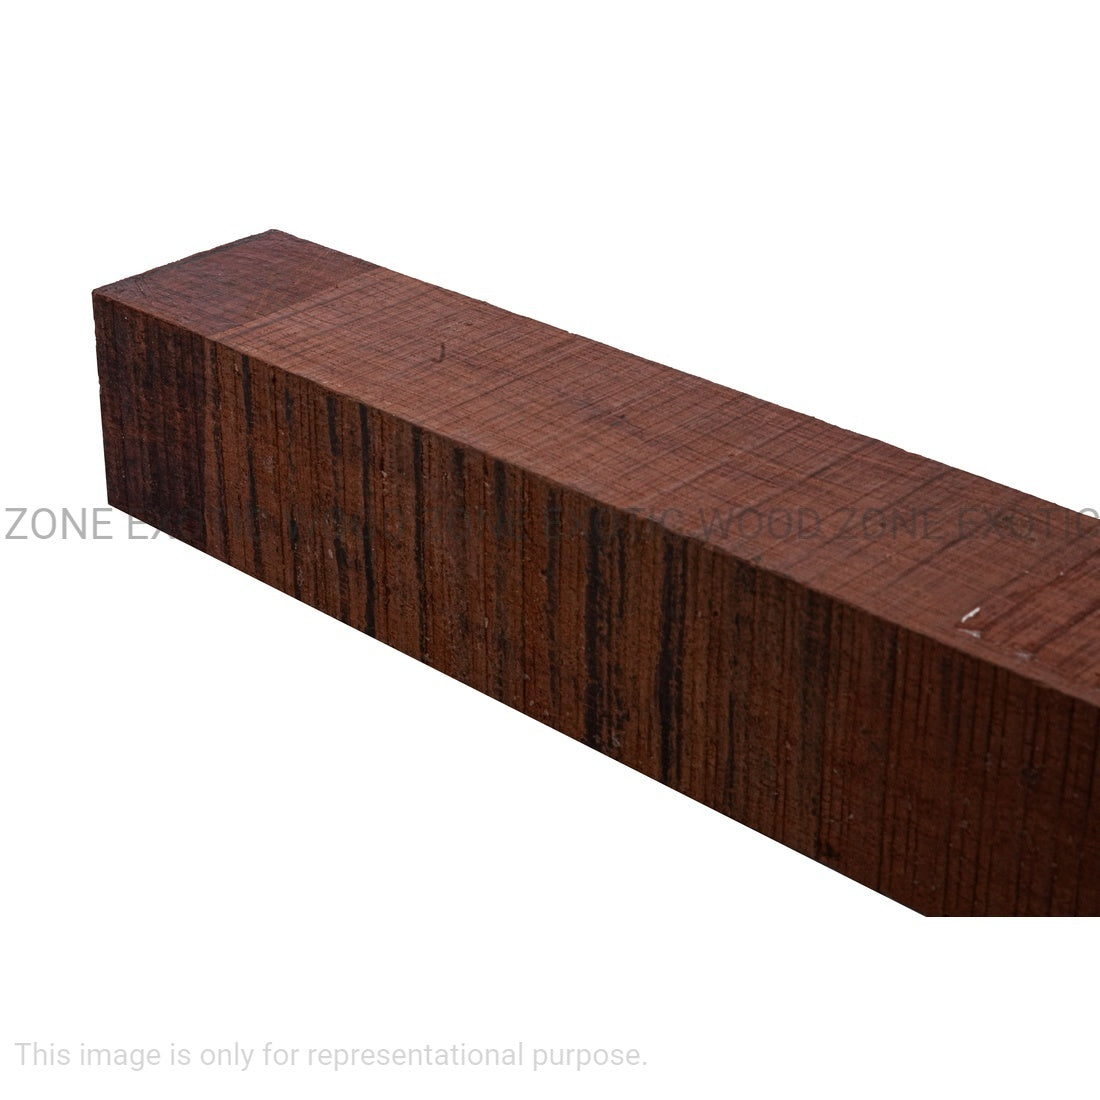 Pack of 3, Bubinga Turning Blanks 1-1/2&quot; x 1-1/2&quot; x 6&quot; - Exotic Wood Zone - Buy online Across USA 